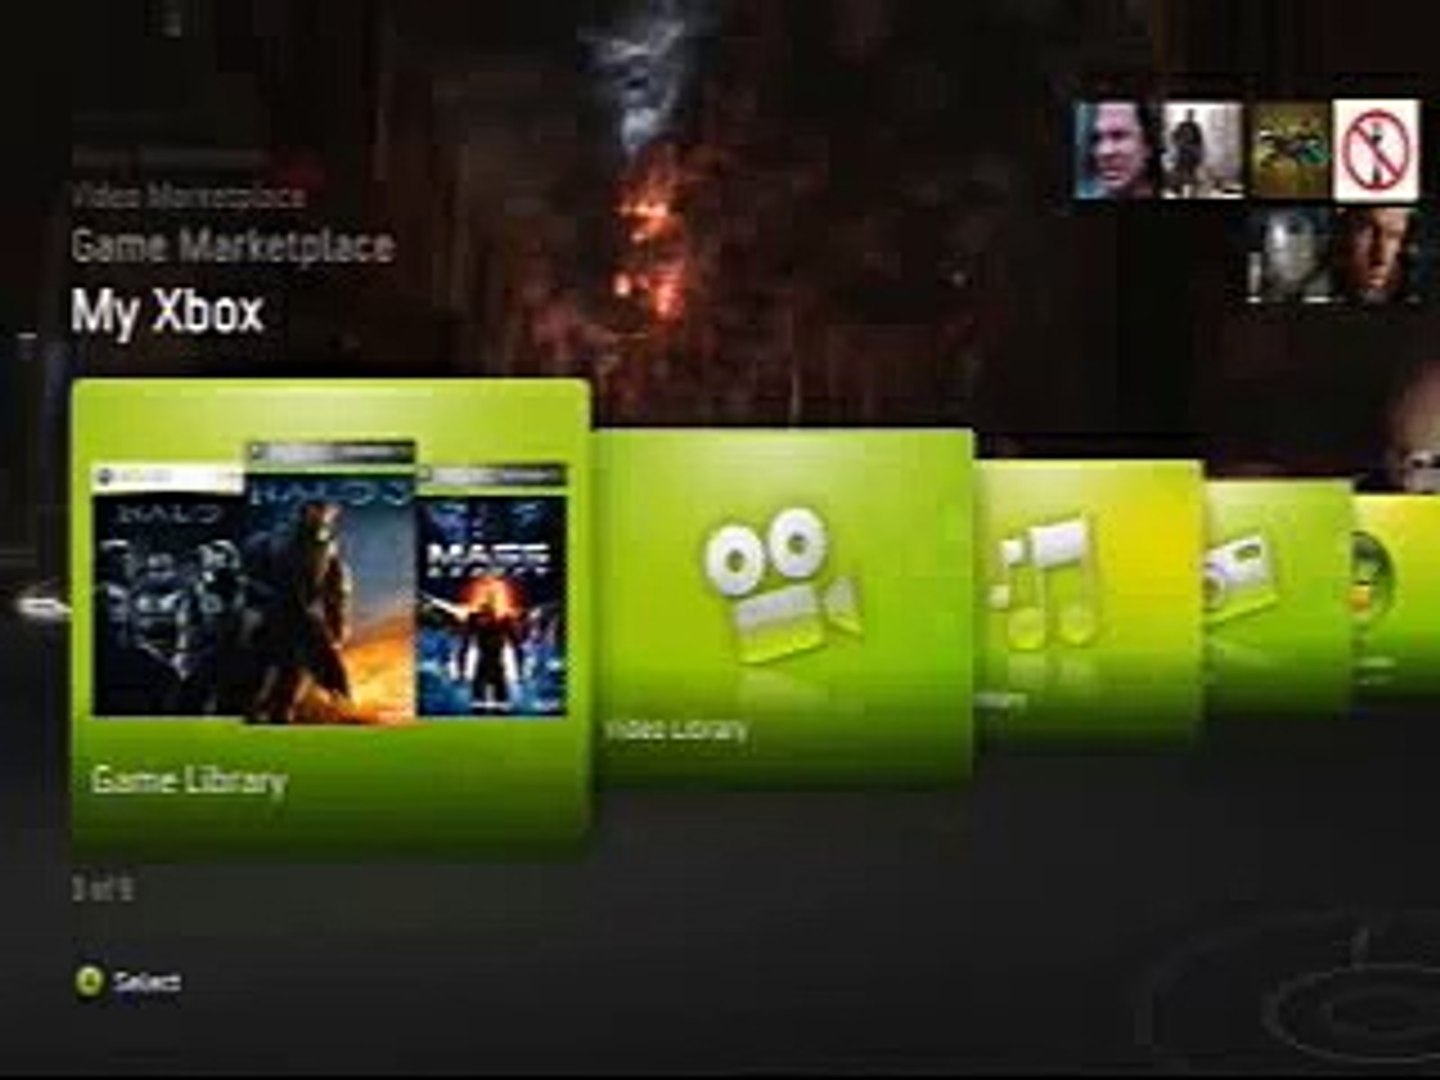 play xbox 360 games on an external hardrive no jtag - video Dailymotion